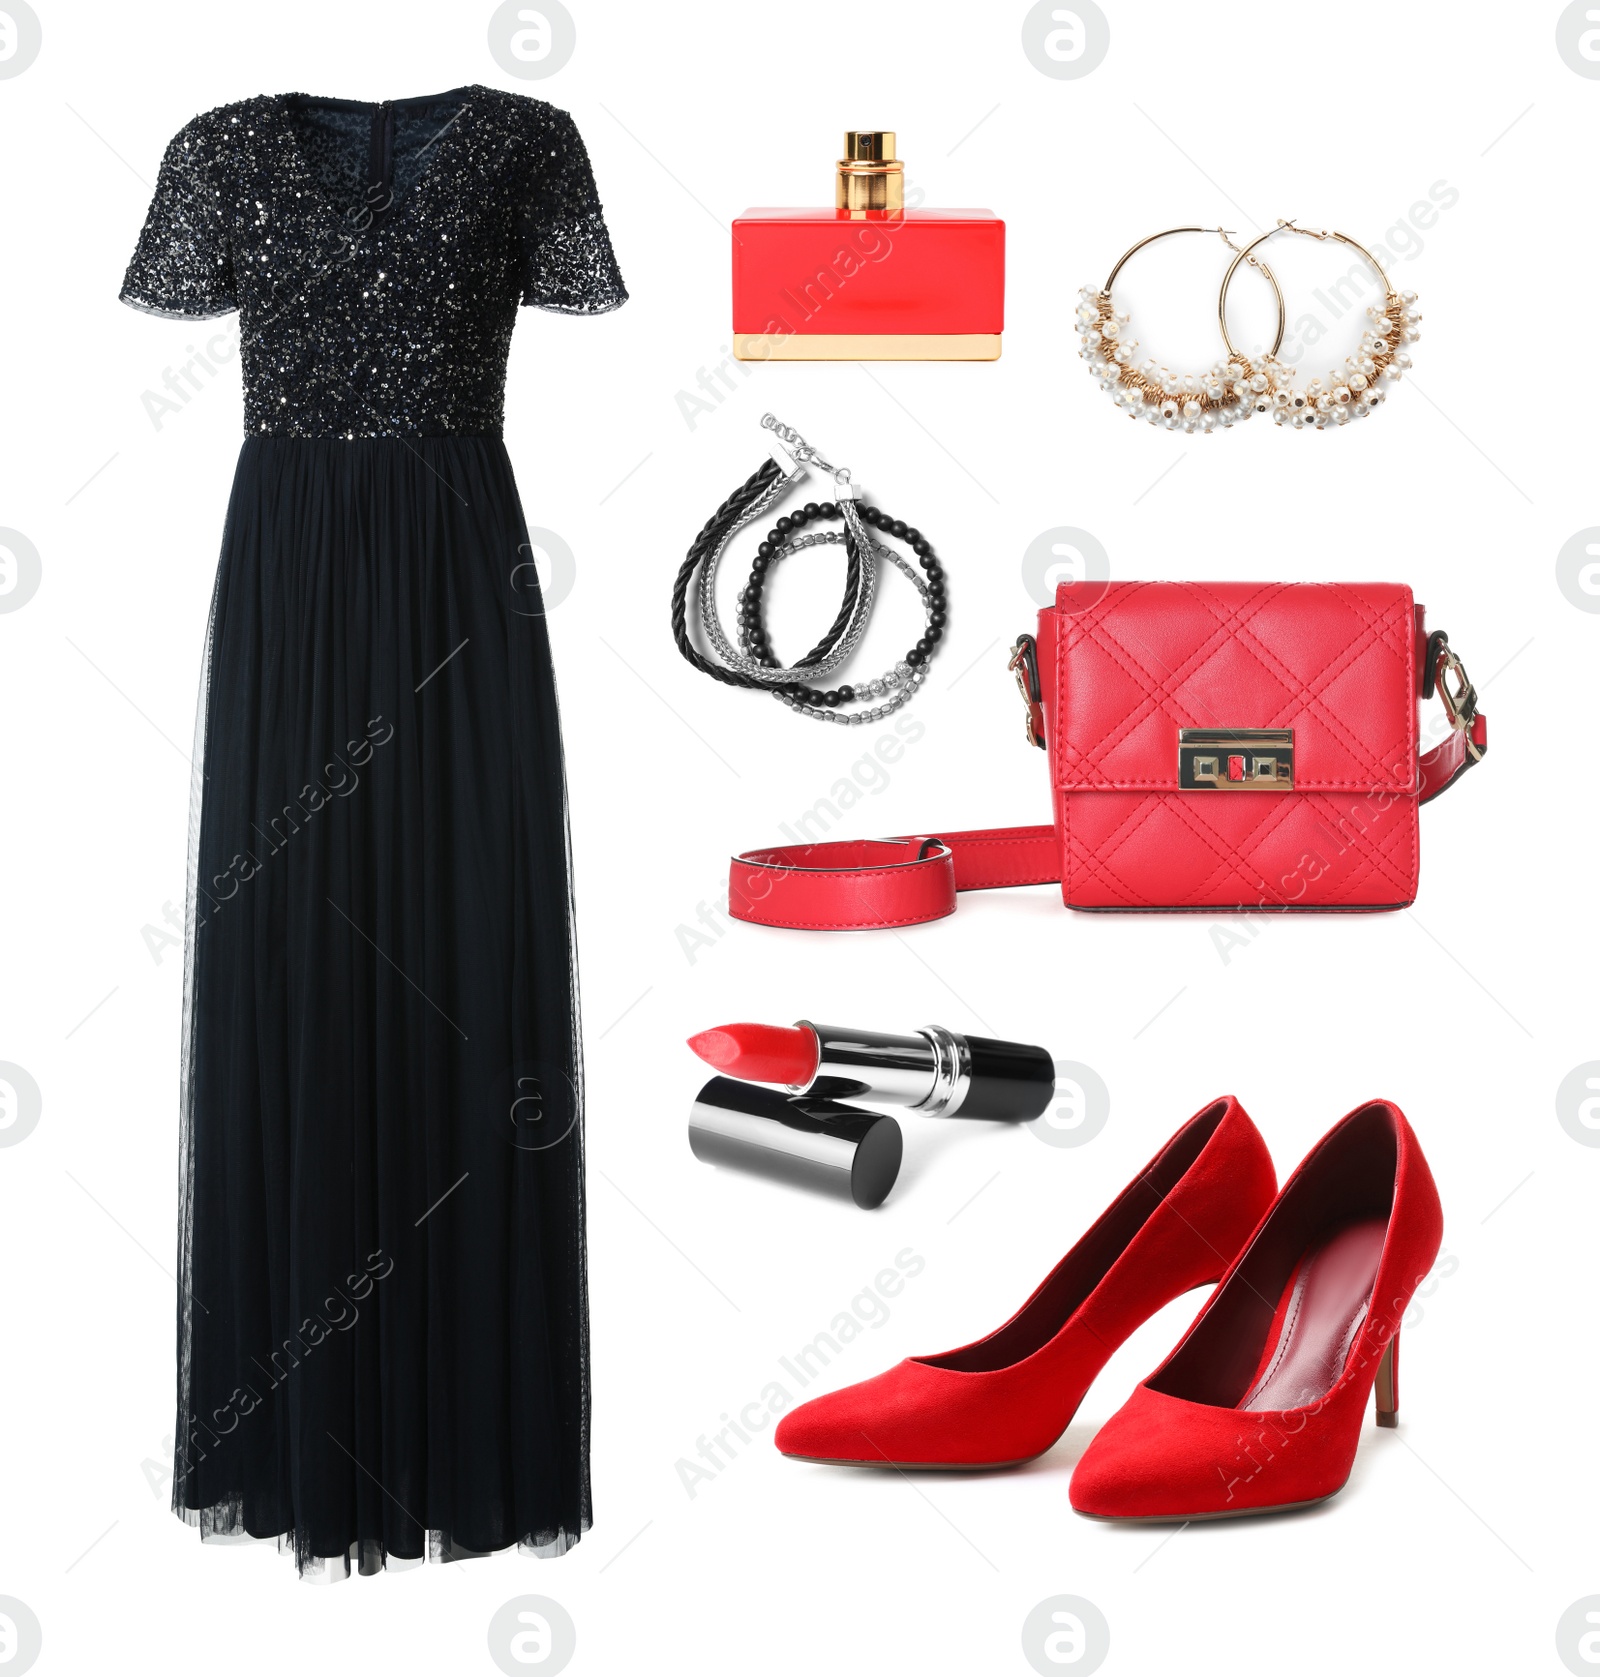 Image of Elegant outfit. Collage with dress, shoes, accessories and cosmetics for woman on white background